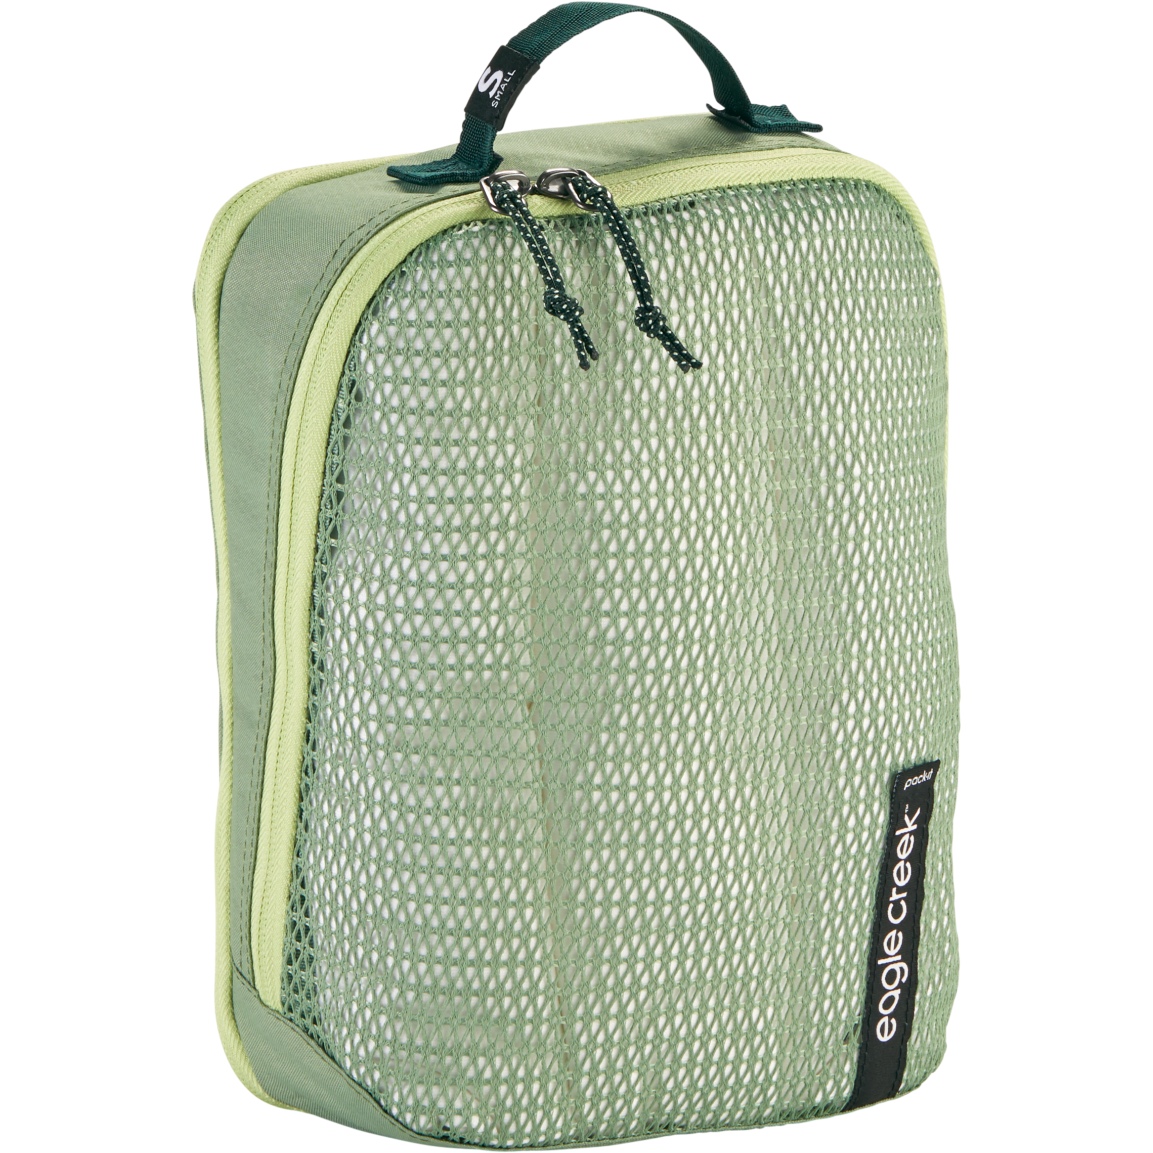 Productfoto van Eagle Creek Pack-It™ Reveal Expansion Cube S - Tas Organizer - mossy green